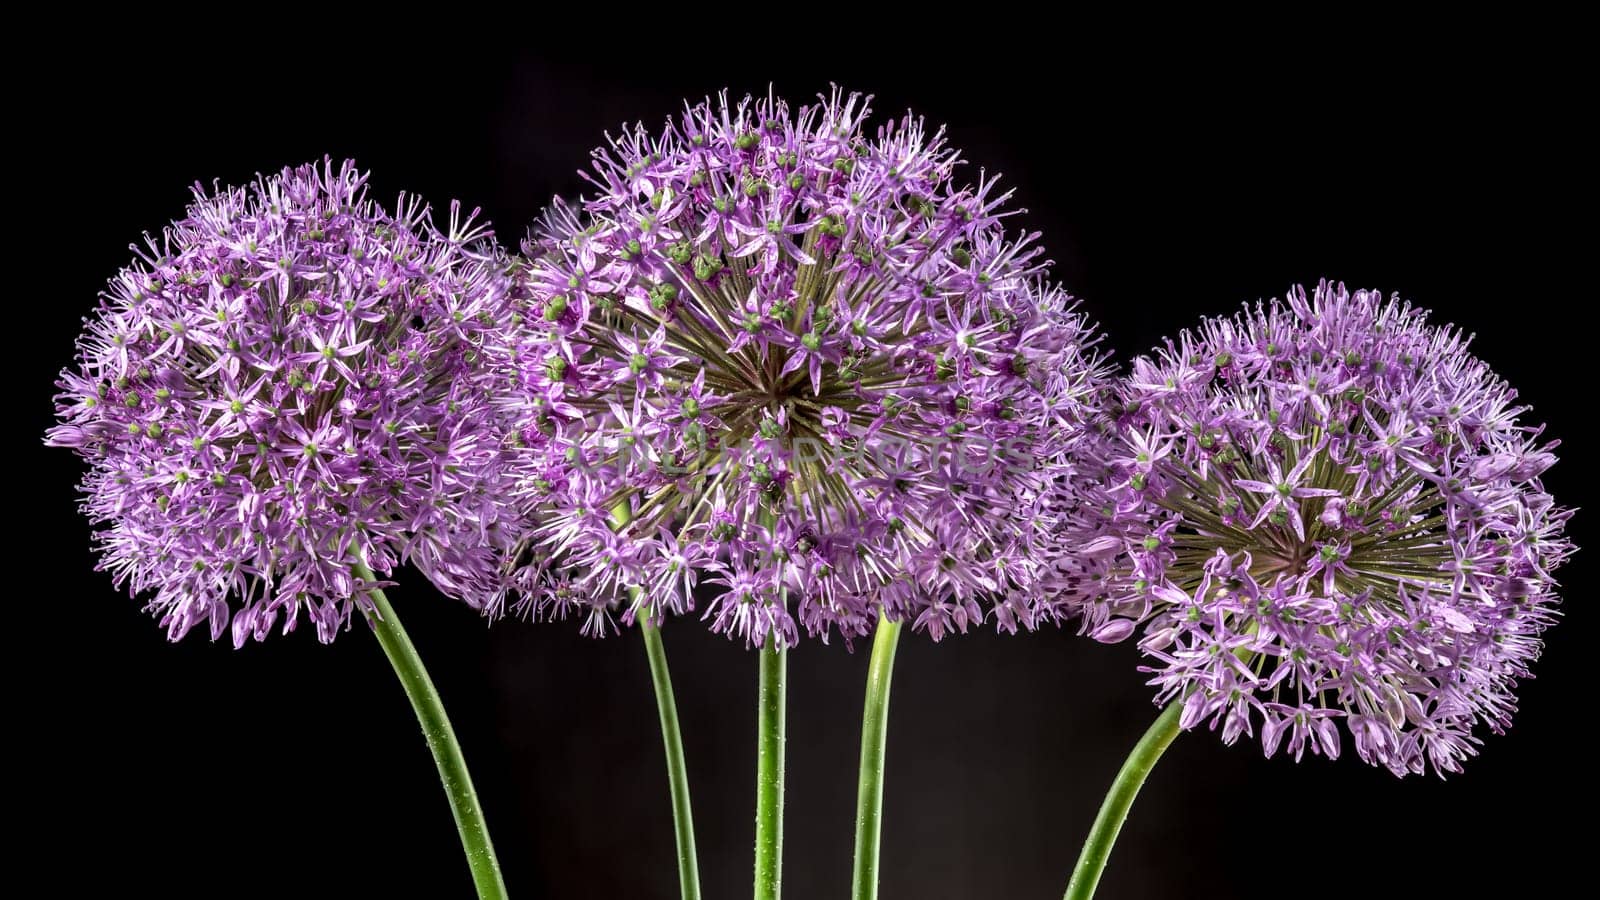 Blooming pink allium aflatunense on a black background by Multipedia